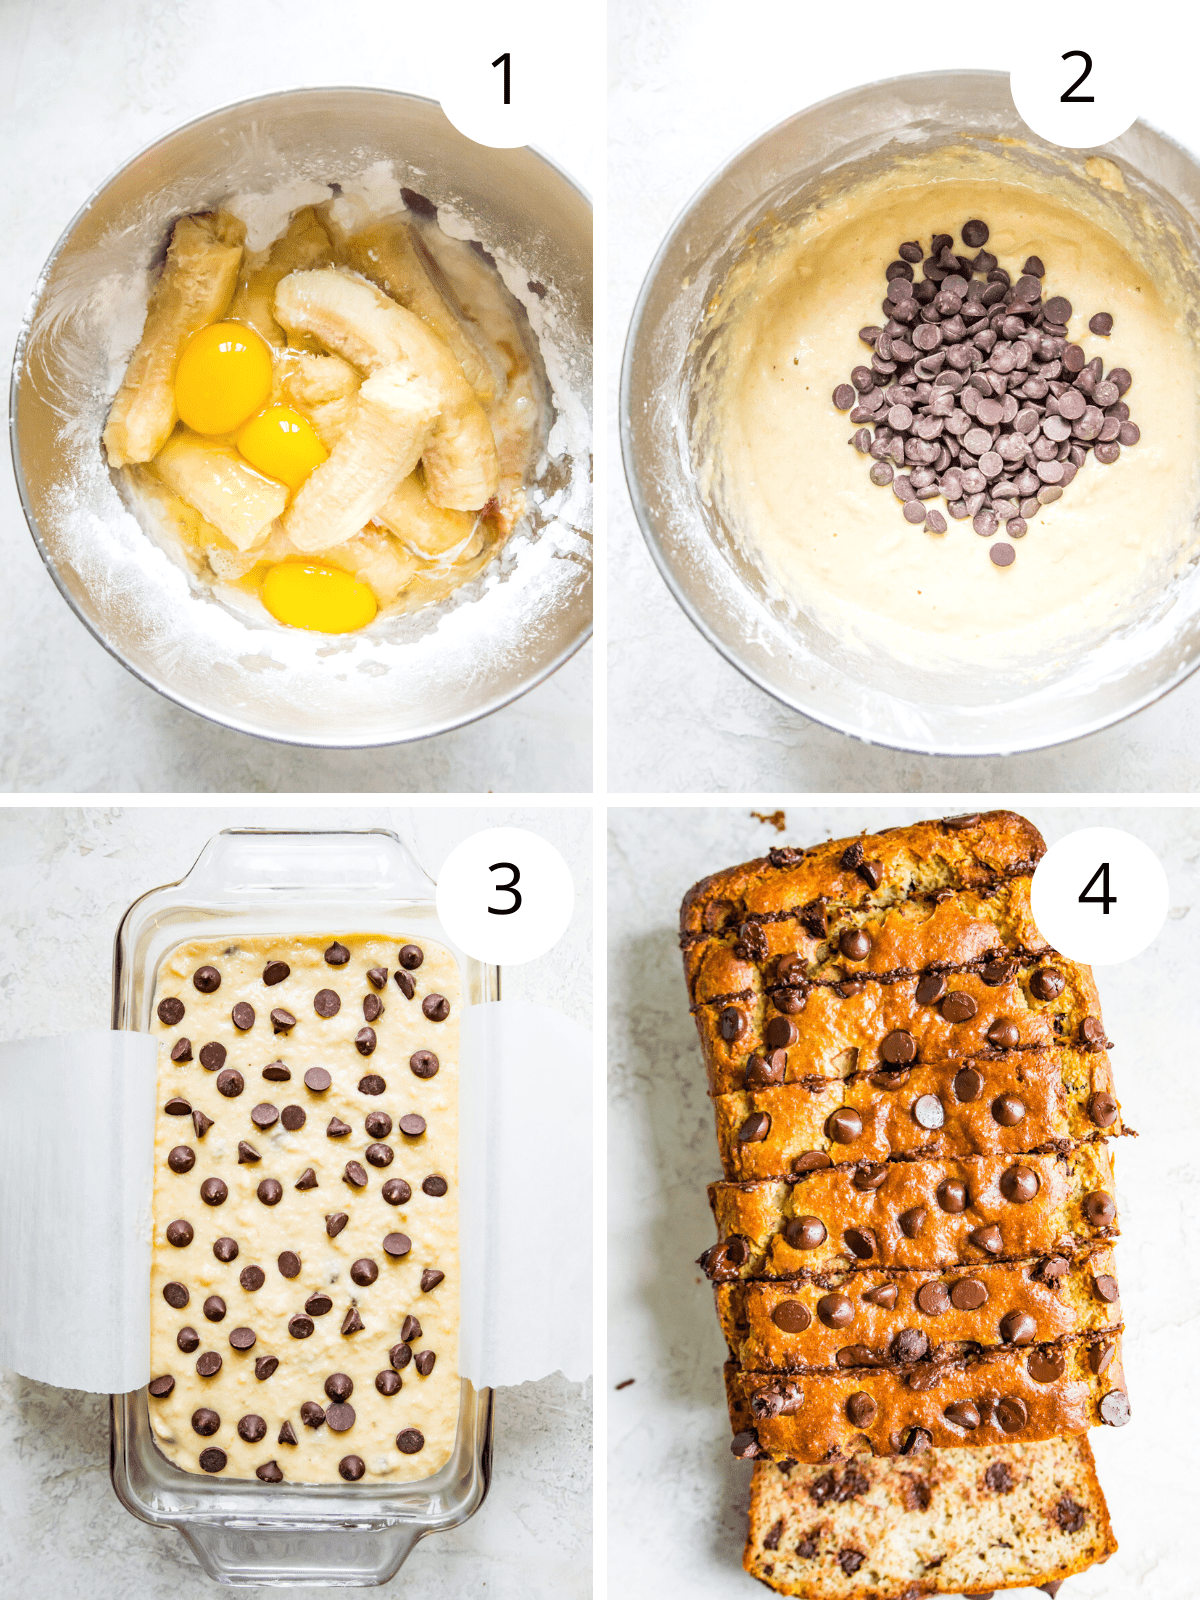 Step by step directions for making a no sugar banana bread recipe.